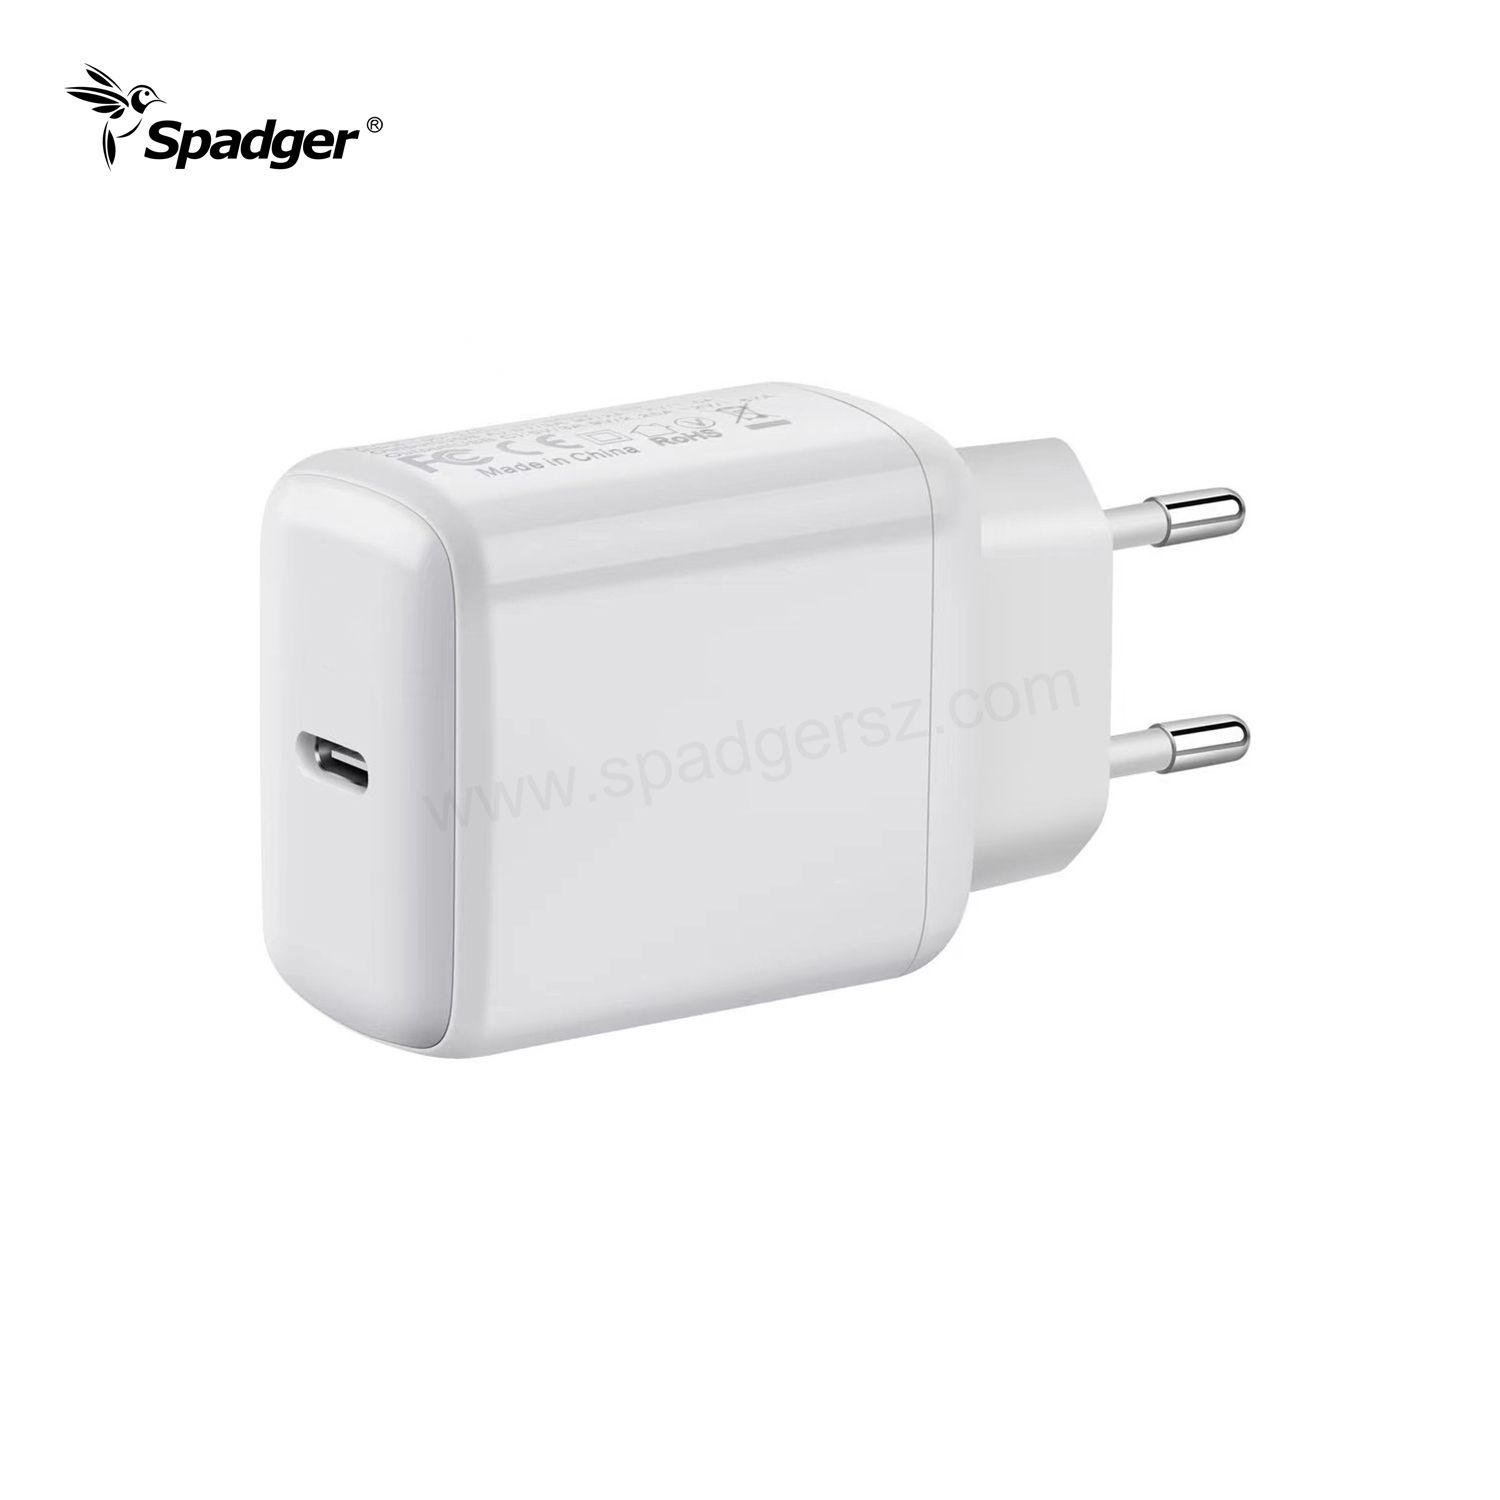 Reasonable price Apple Phone Charger - Original Factory TYPE-C Fast Charger PD30W Travel charger USB C USB C Mobile Phone Charger UK US AU EU Plug – Spadger